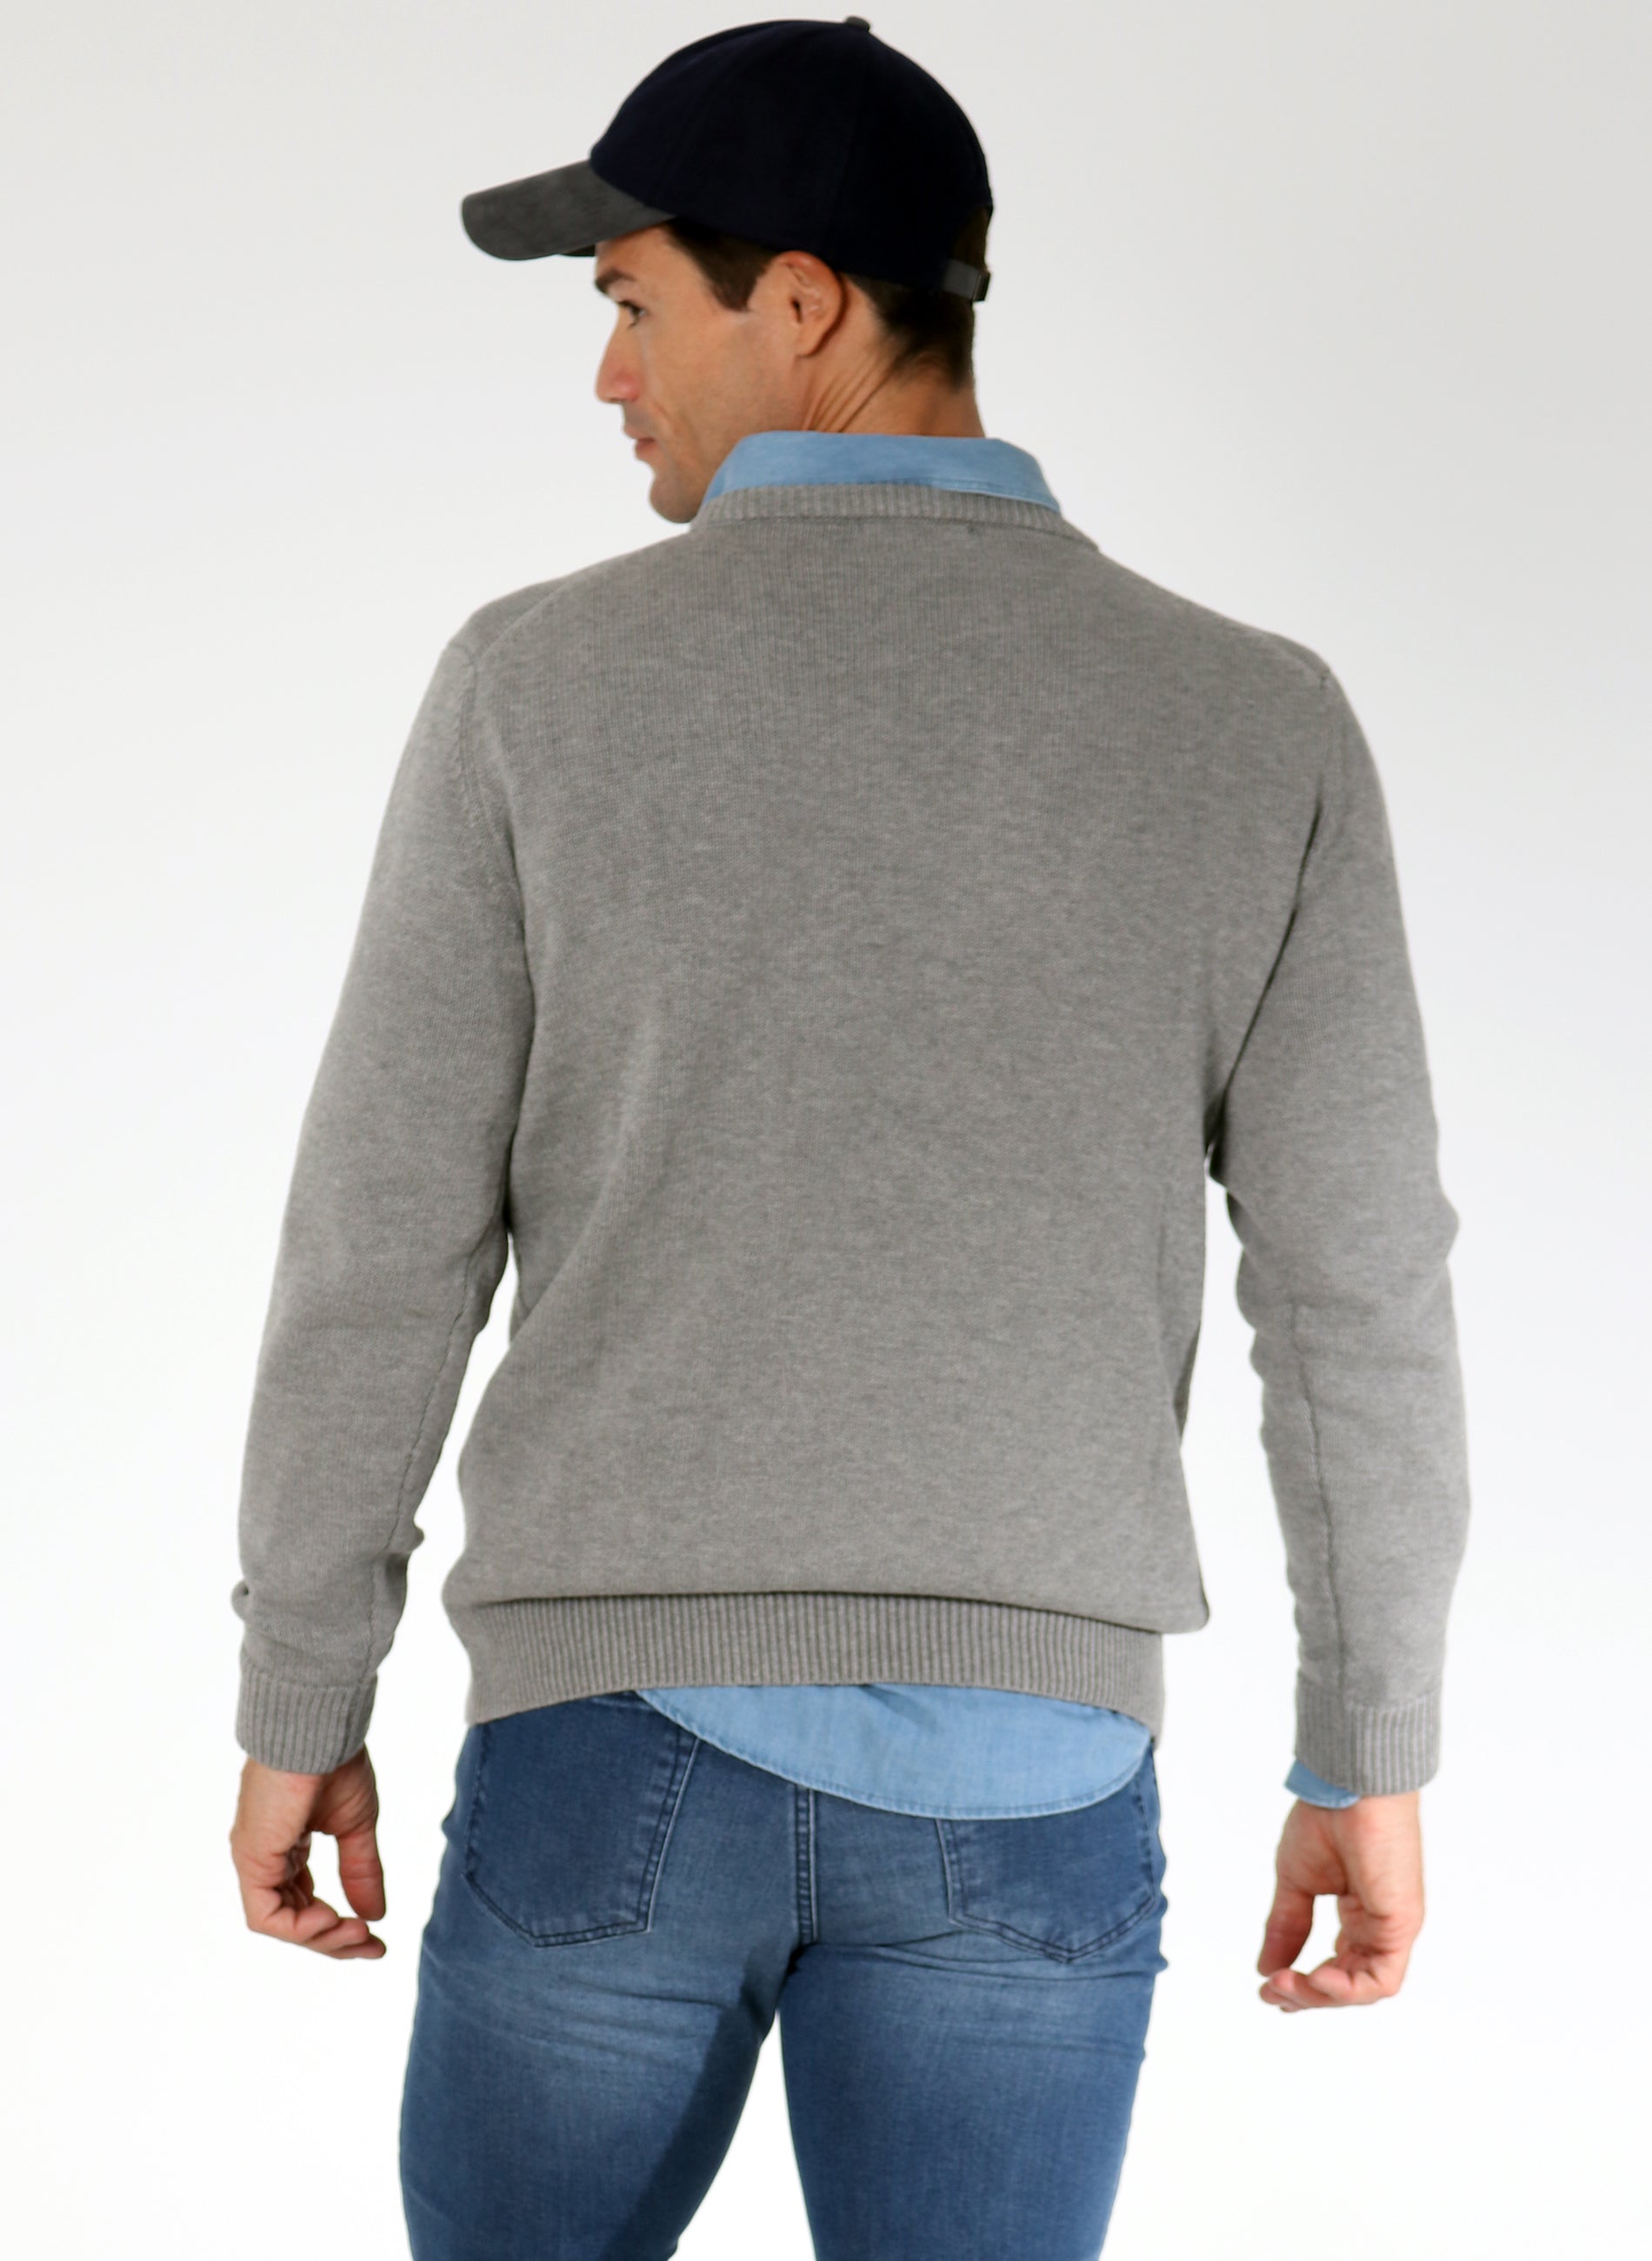 Pull Homme Gris Slogan Circulaire